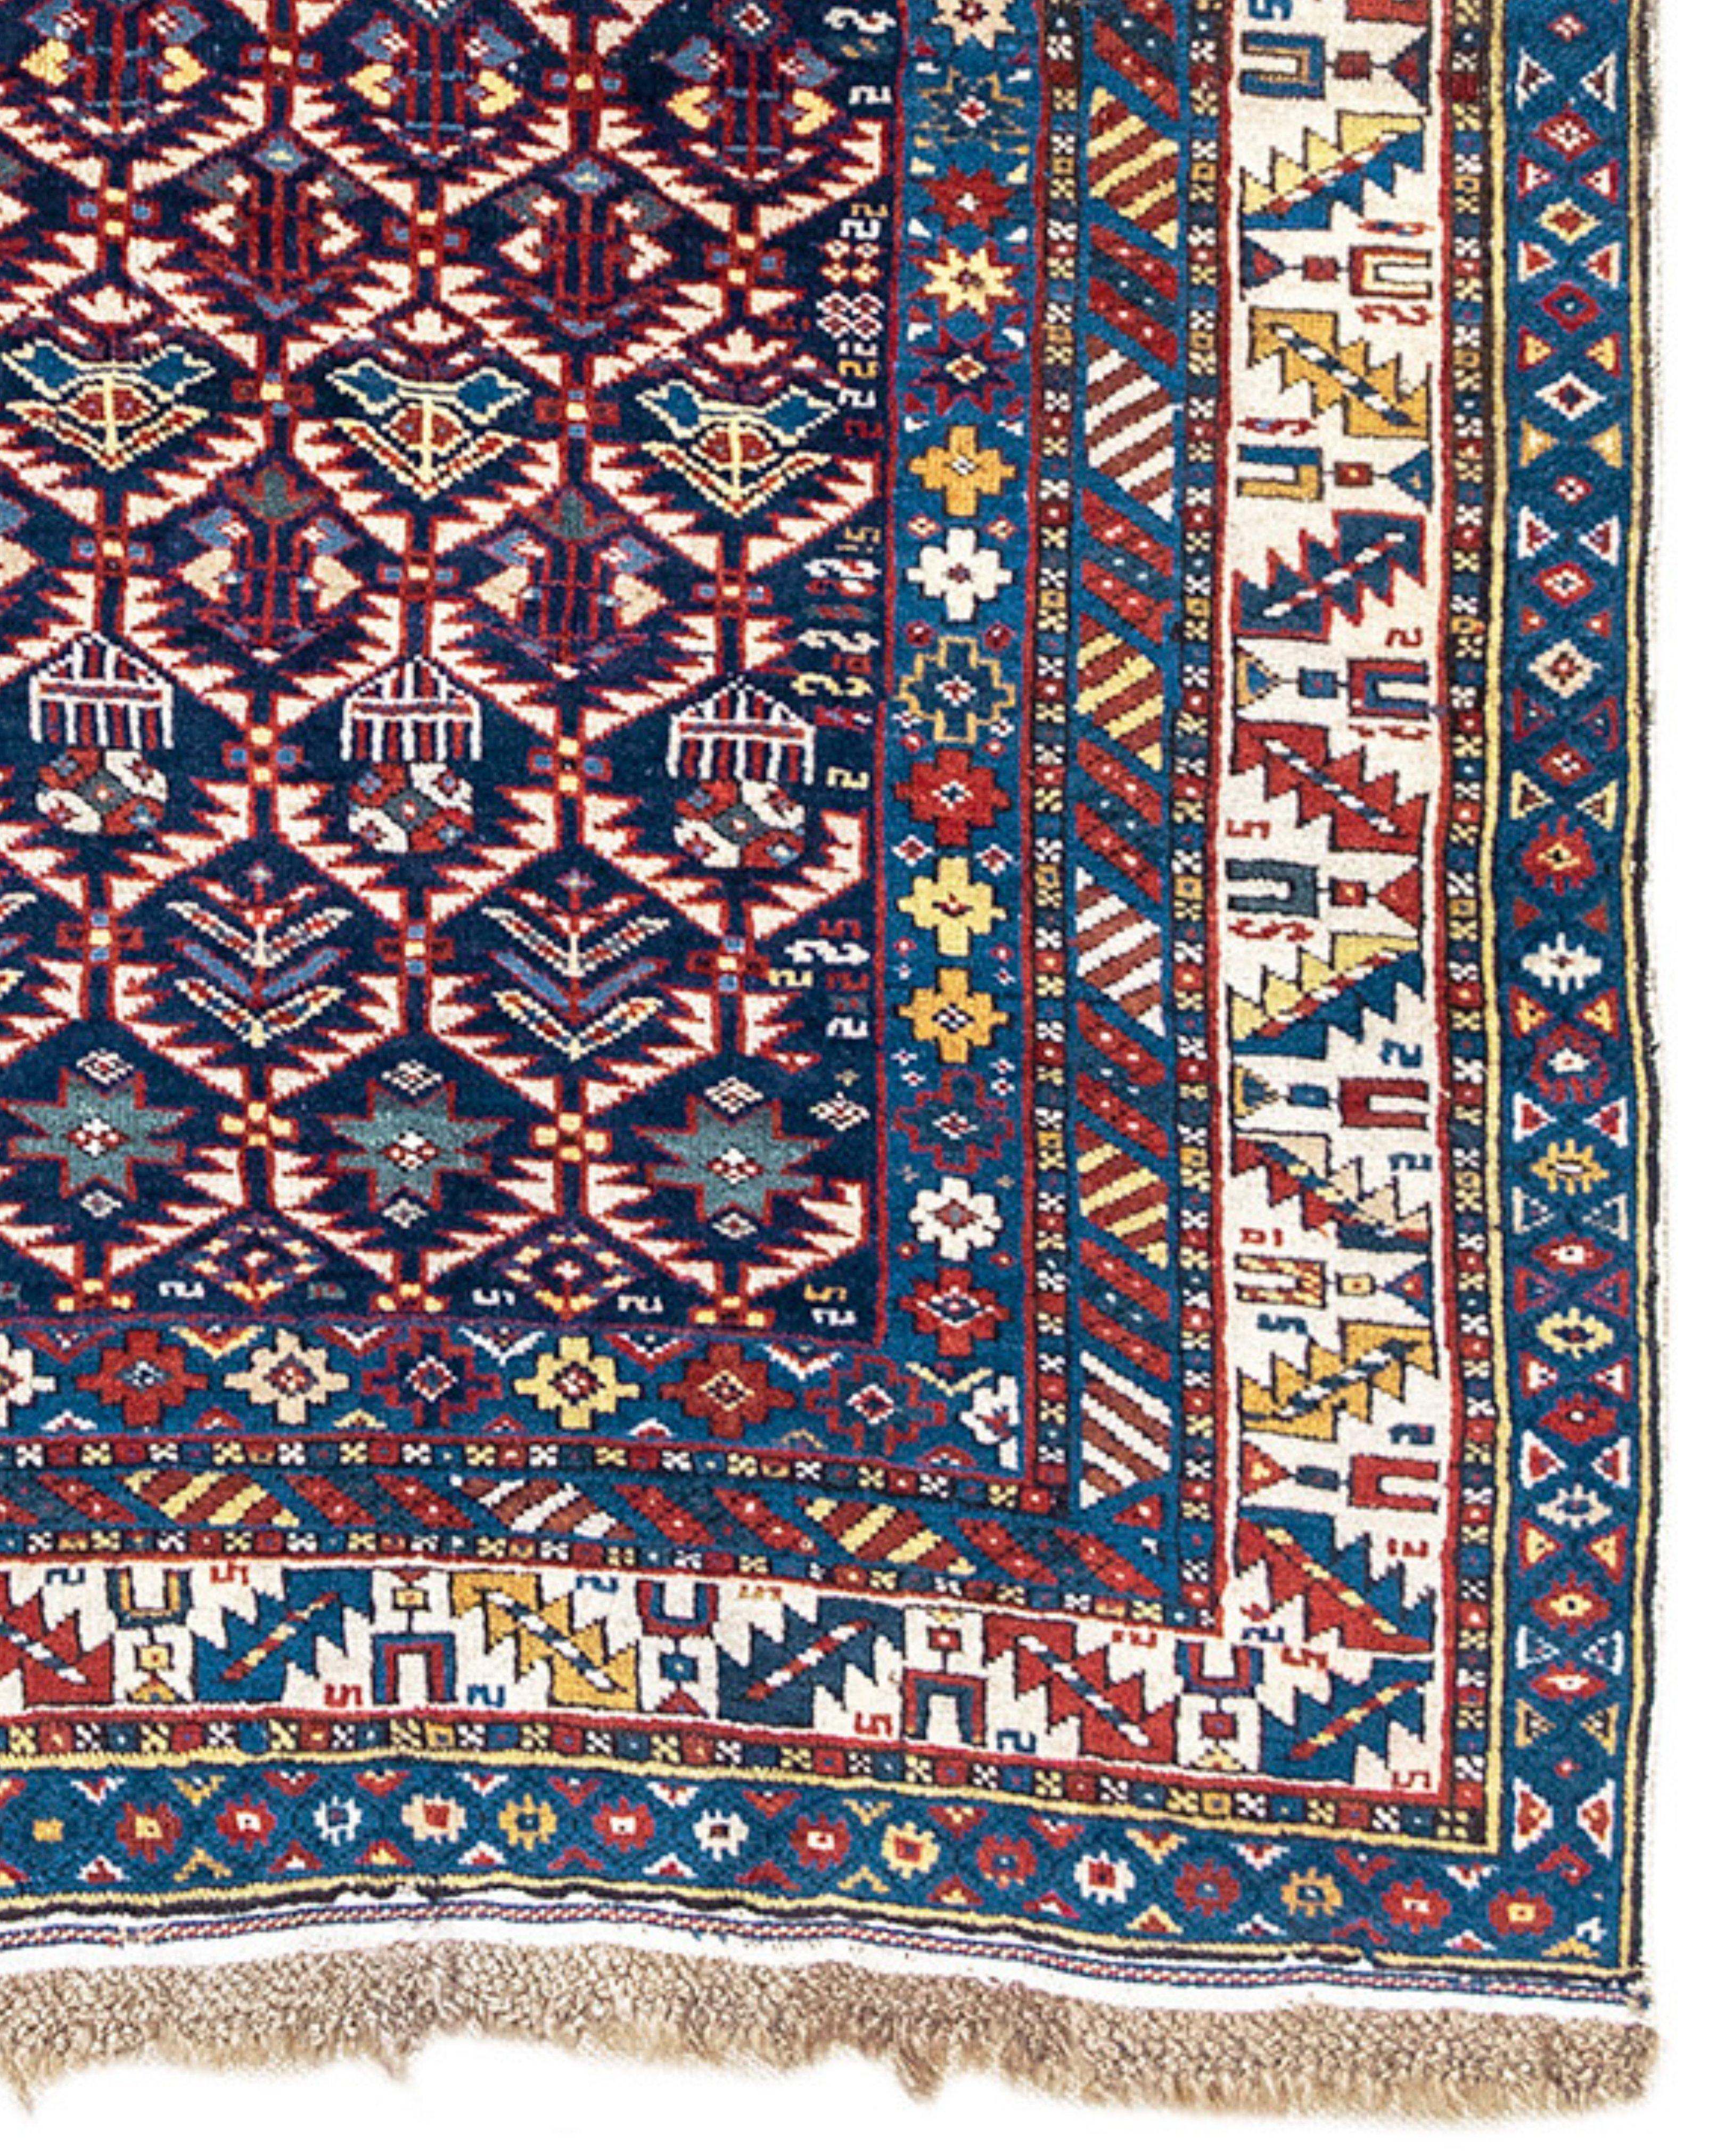 Kuba Rug, 19th Century

This jewel of an East Caucasian rug draws a host of folk motifs within a lattice of abstracted ivory foliage. Rows of colorful shrubs, flowering plants, eight-pointed stars, and even human figures atop horses glow against a